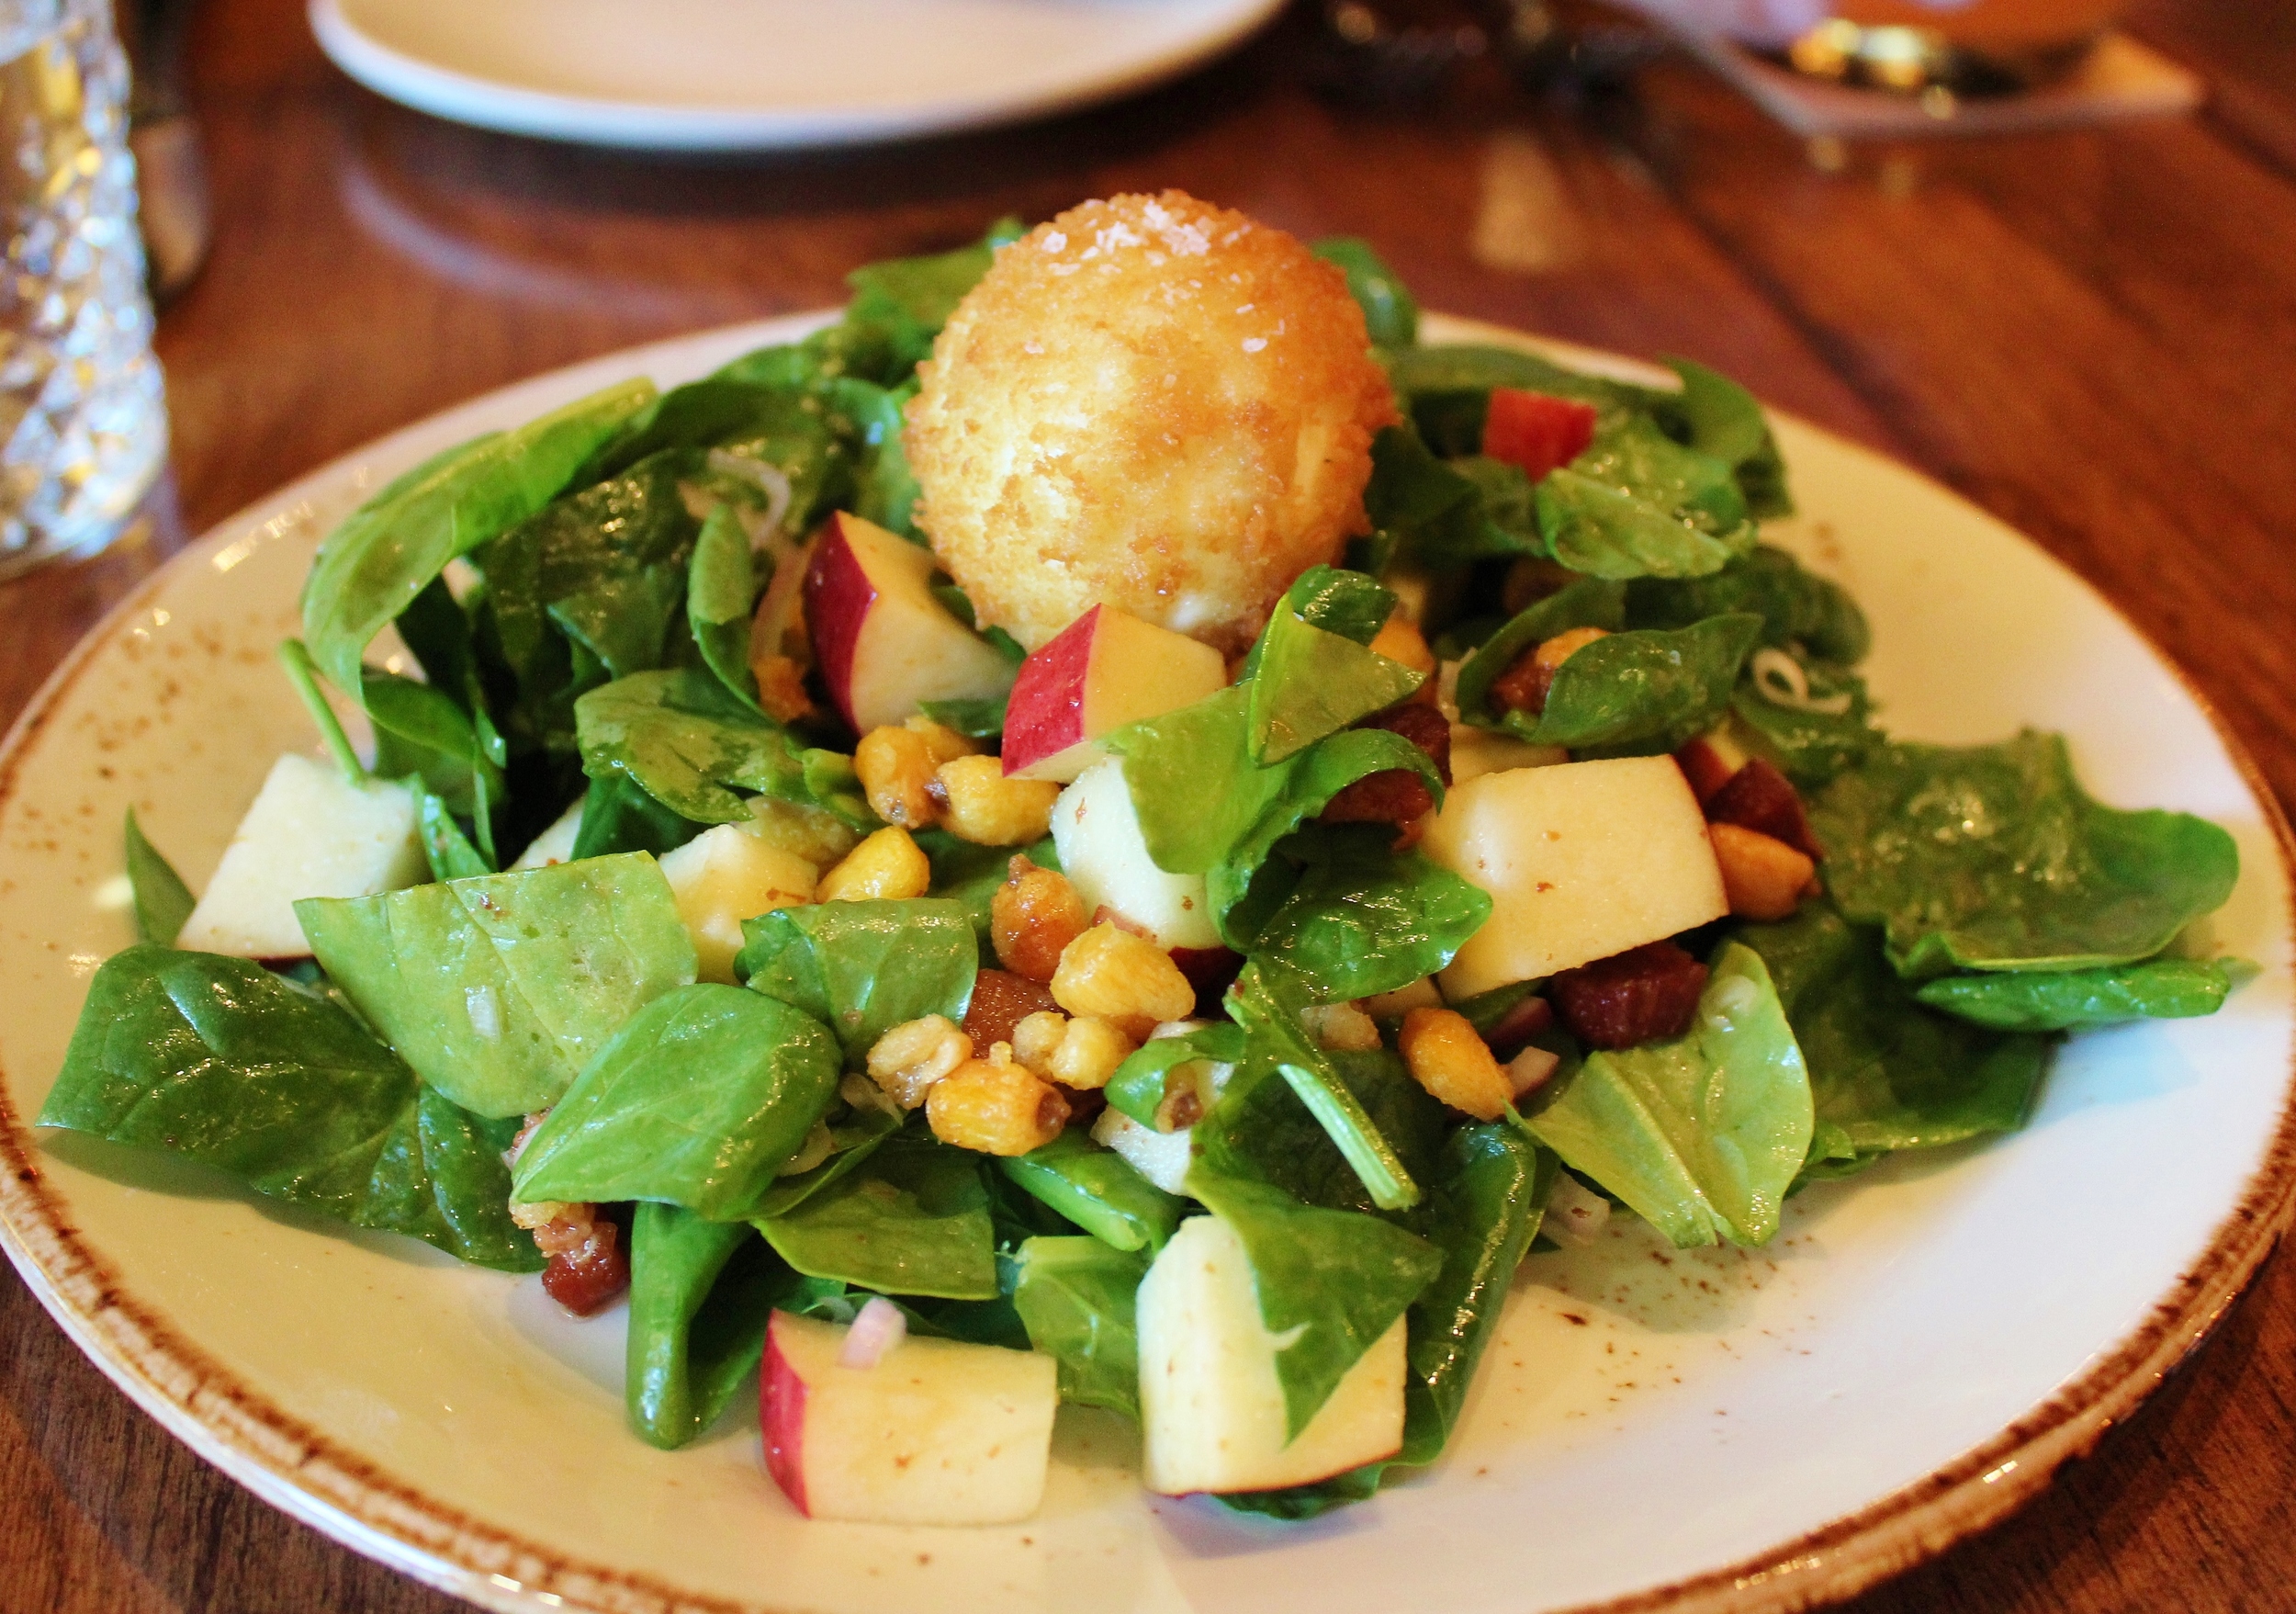 Spinach salad with crispy soft-boiled egg, apple, shallots, corn nuts, bacon vinaigrette